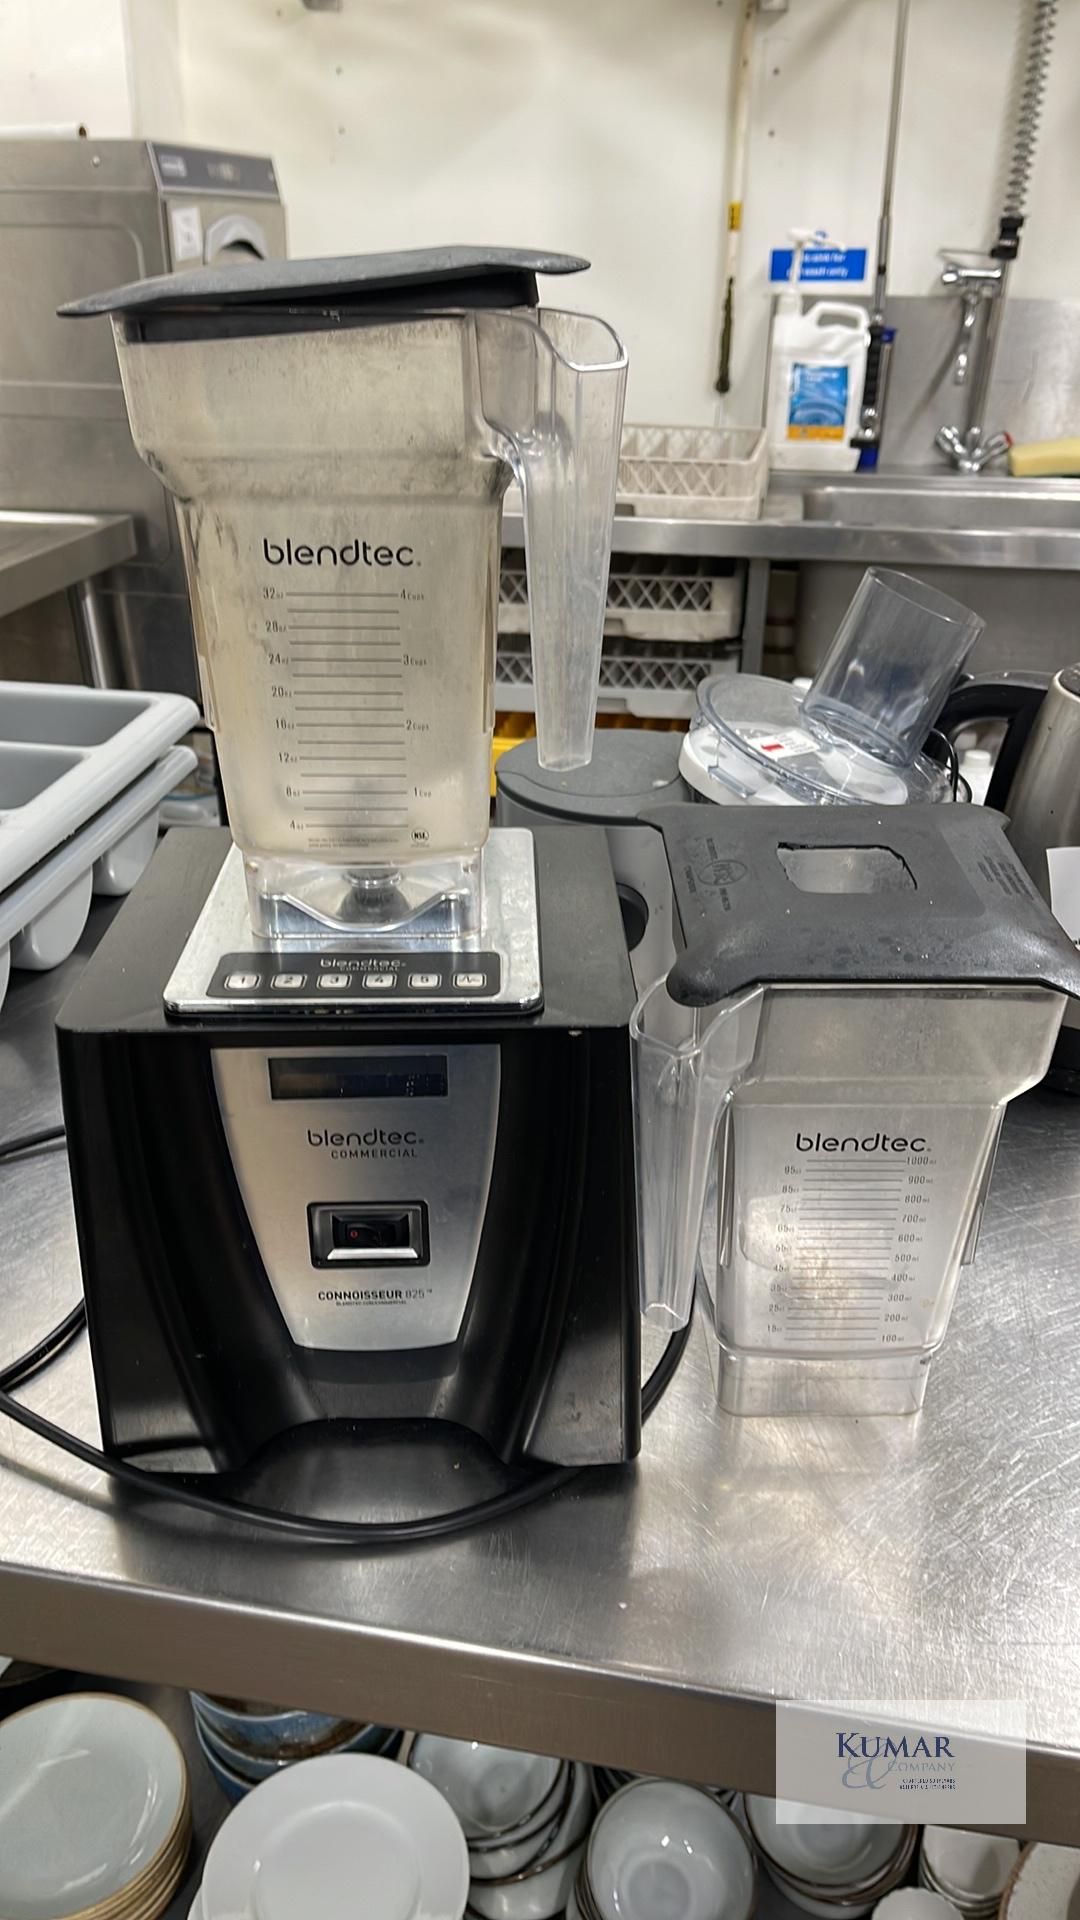 Blendtec Connoisseur 825 Commercial Blender with 2: Containers - New Cost Circa Â£1200